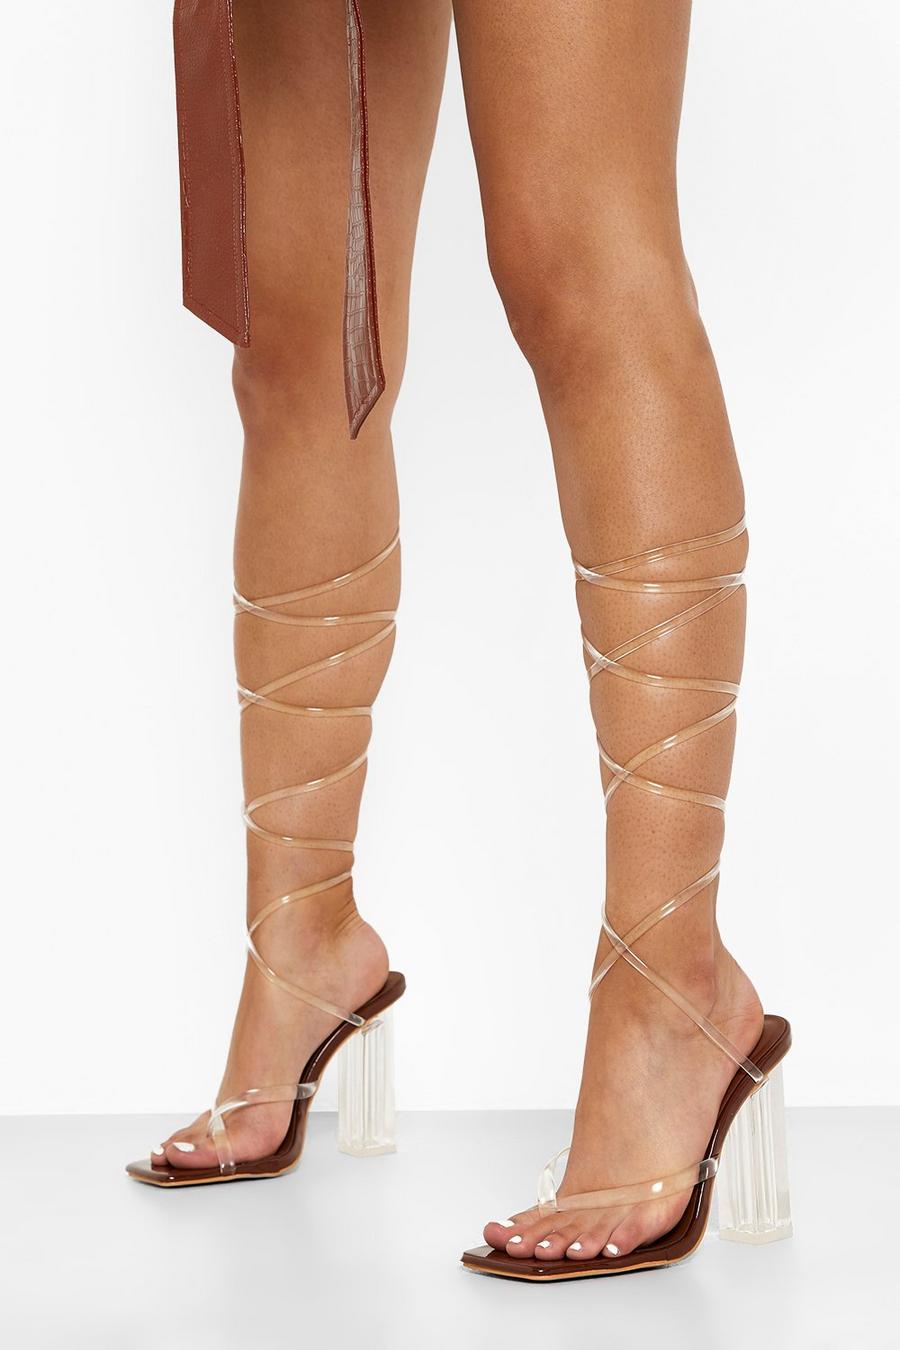 Chocolate Clear Patent Strappy Heels